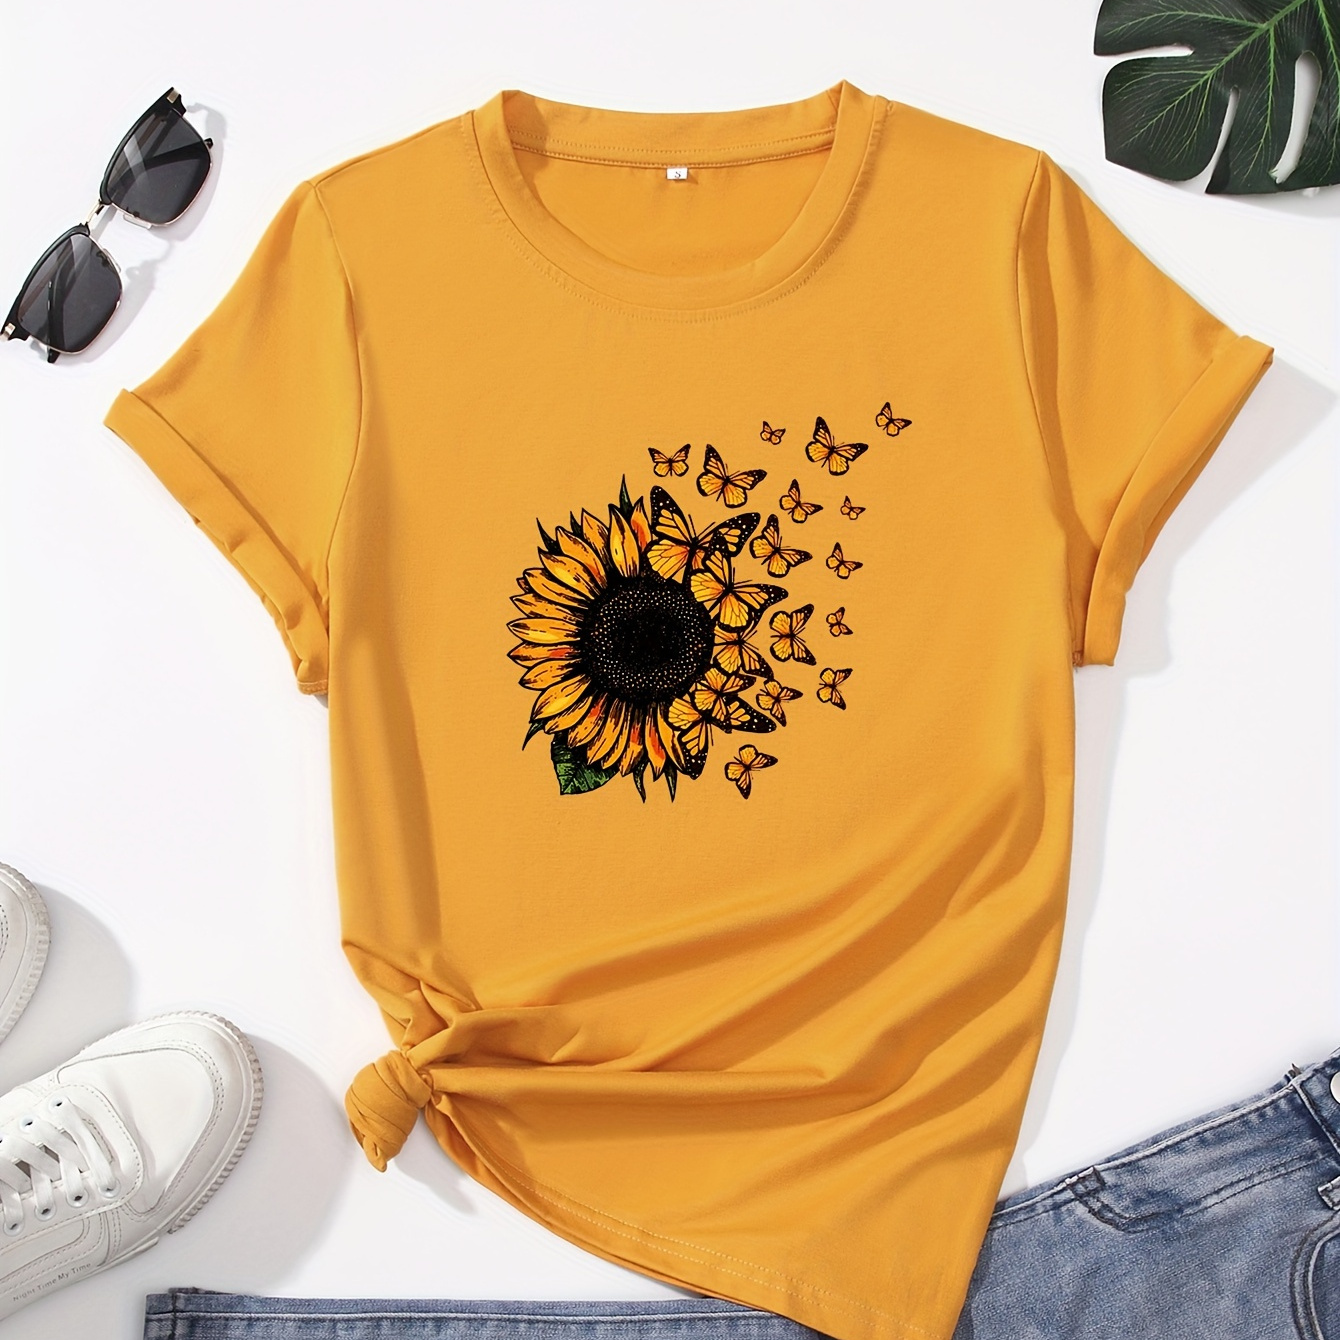 

Sunflower & Butterfly Print Crew Neck T-shirt, Casual Short Sleeve Top For Spring & Summer, Women's Clothing